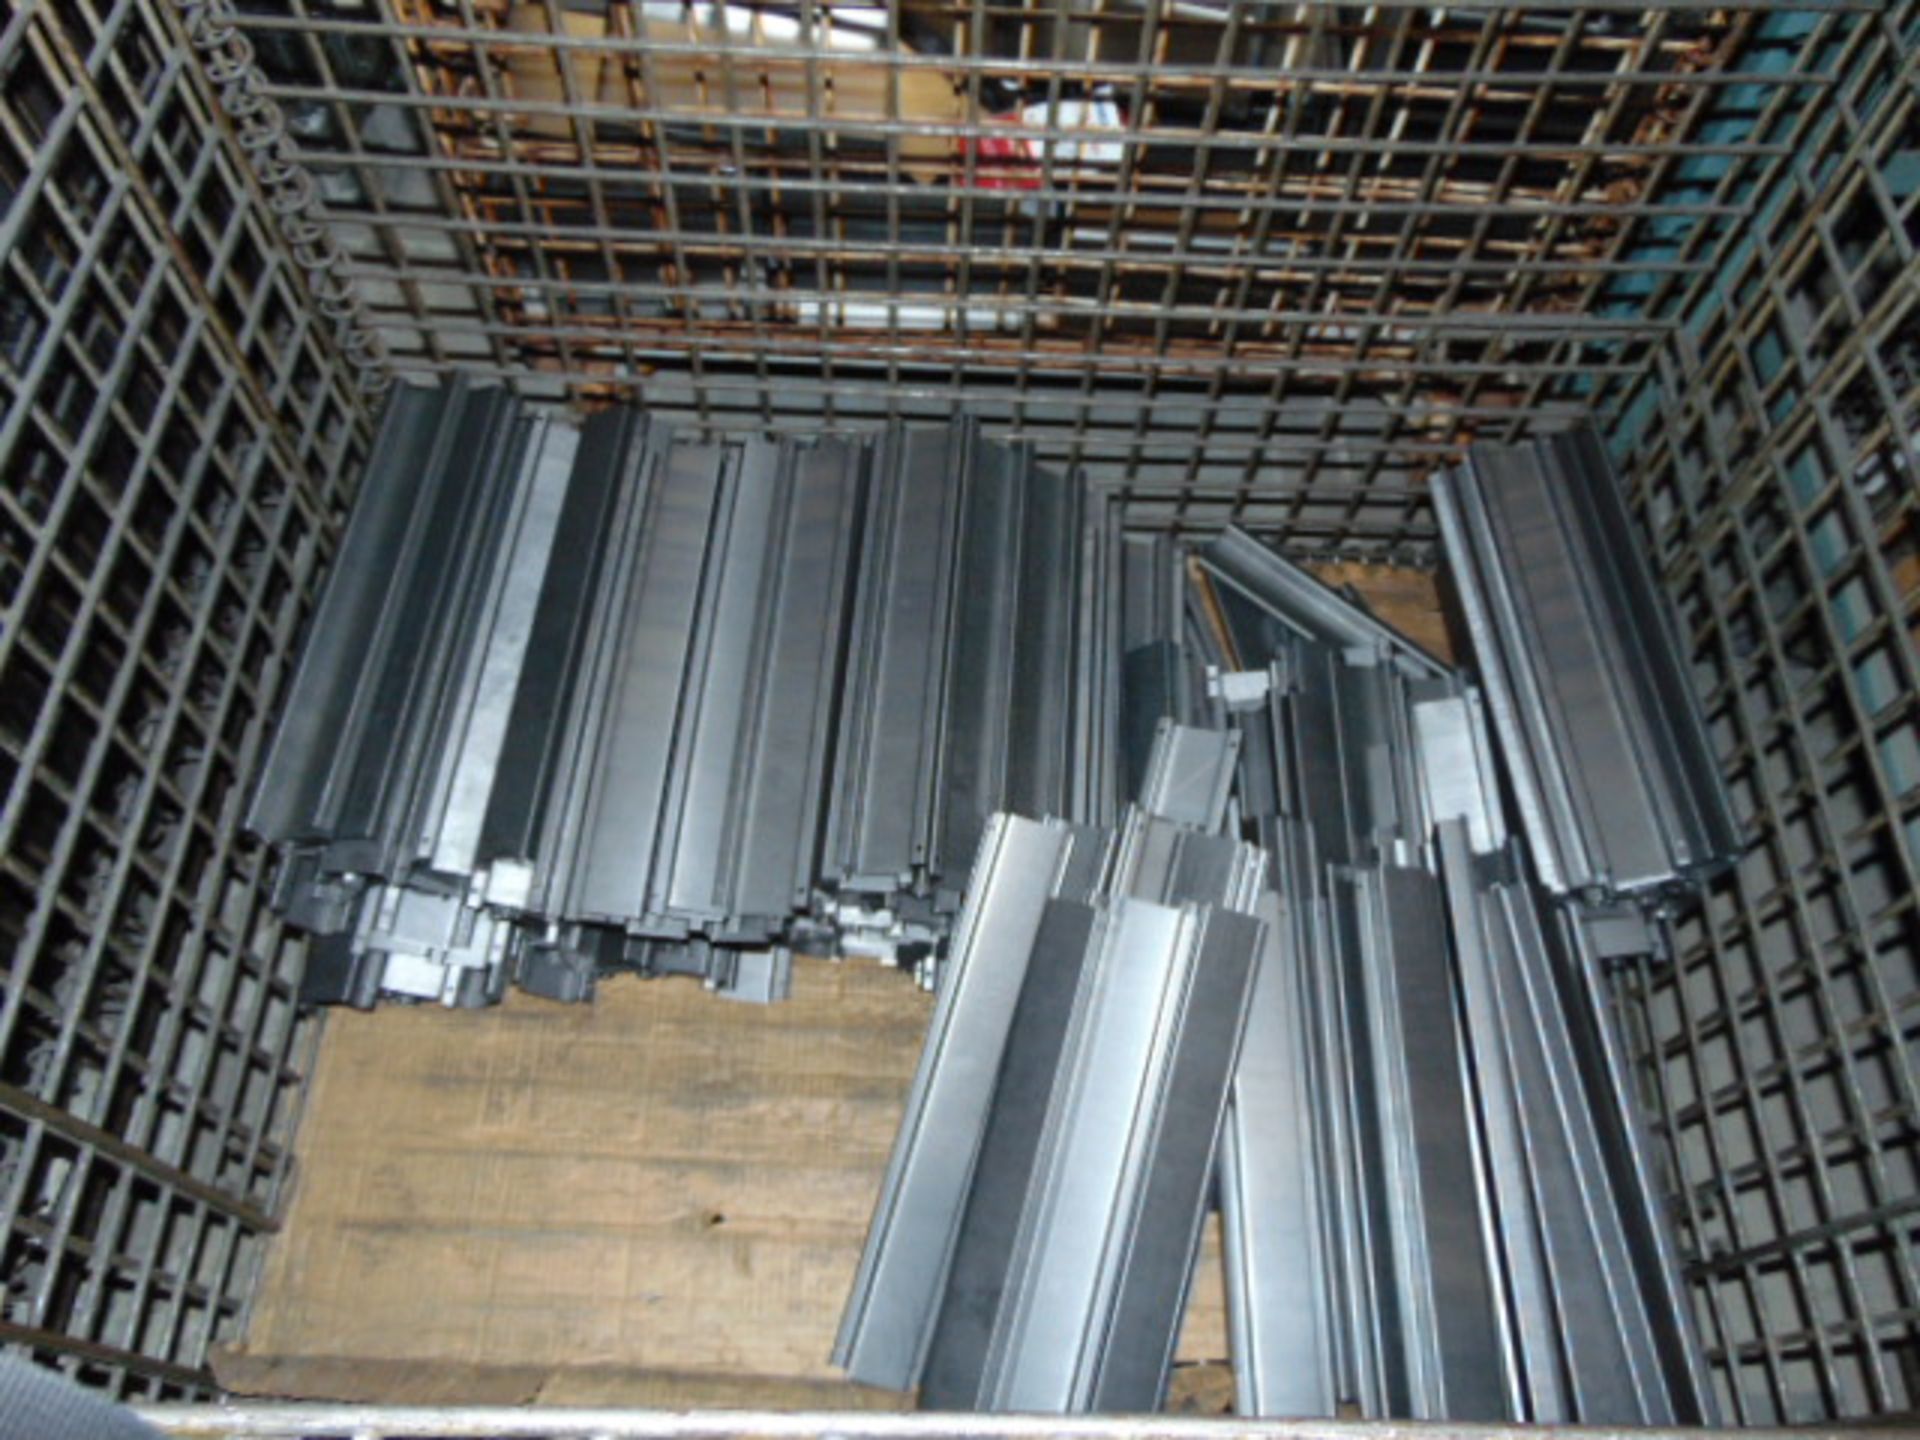 LOT CONSISTING OF: assorted steel in process parts, wire baskets & cardboard (no dies or racks) ( - Image 30 of 39